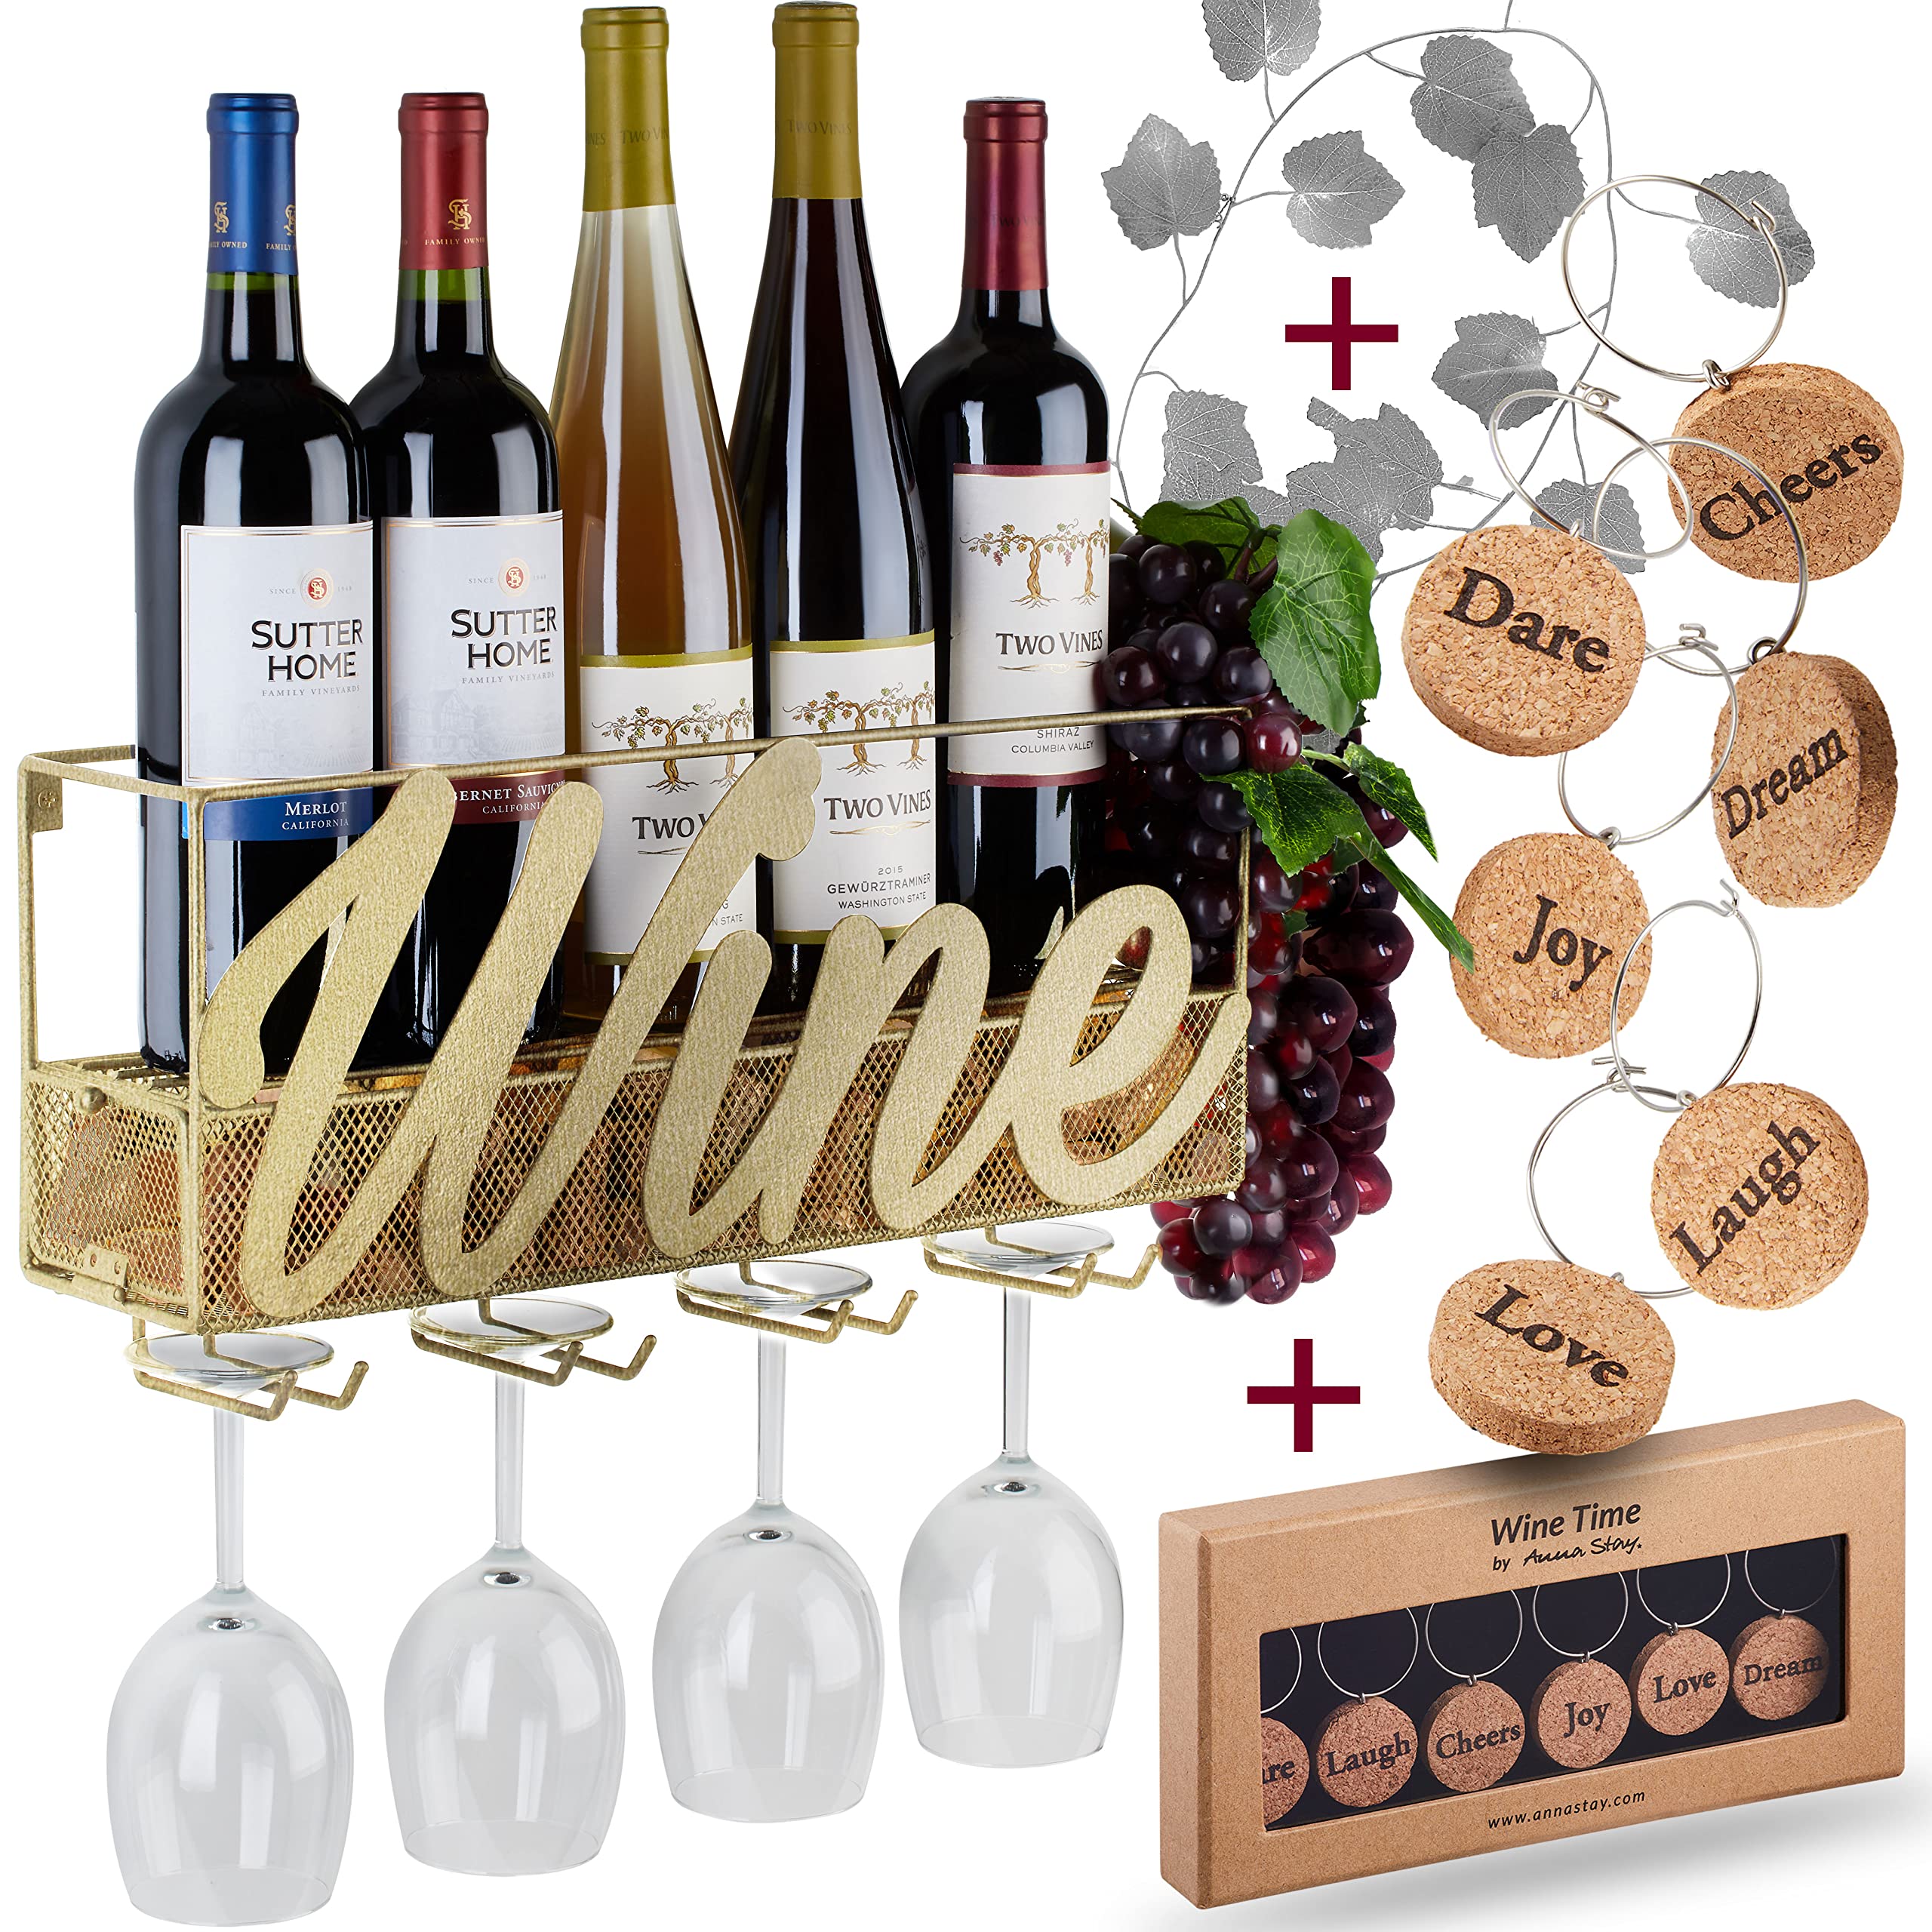 Anna Stay Wine Rack Wall Mounted - Decorative Wine Rack with Wine Glass Holder, Wall Mounted Wine Rack inc Cork Storage & Wine Charms, Wine Gifts with Wine Bottle Holder for Wine Decor  - Like New